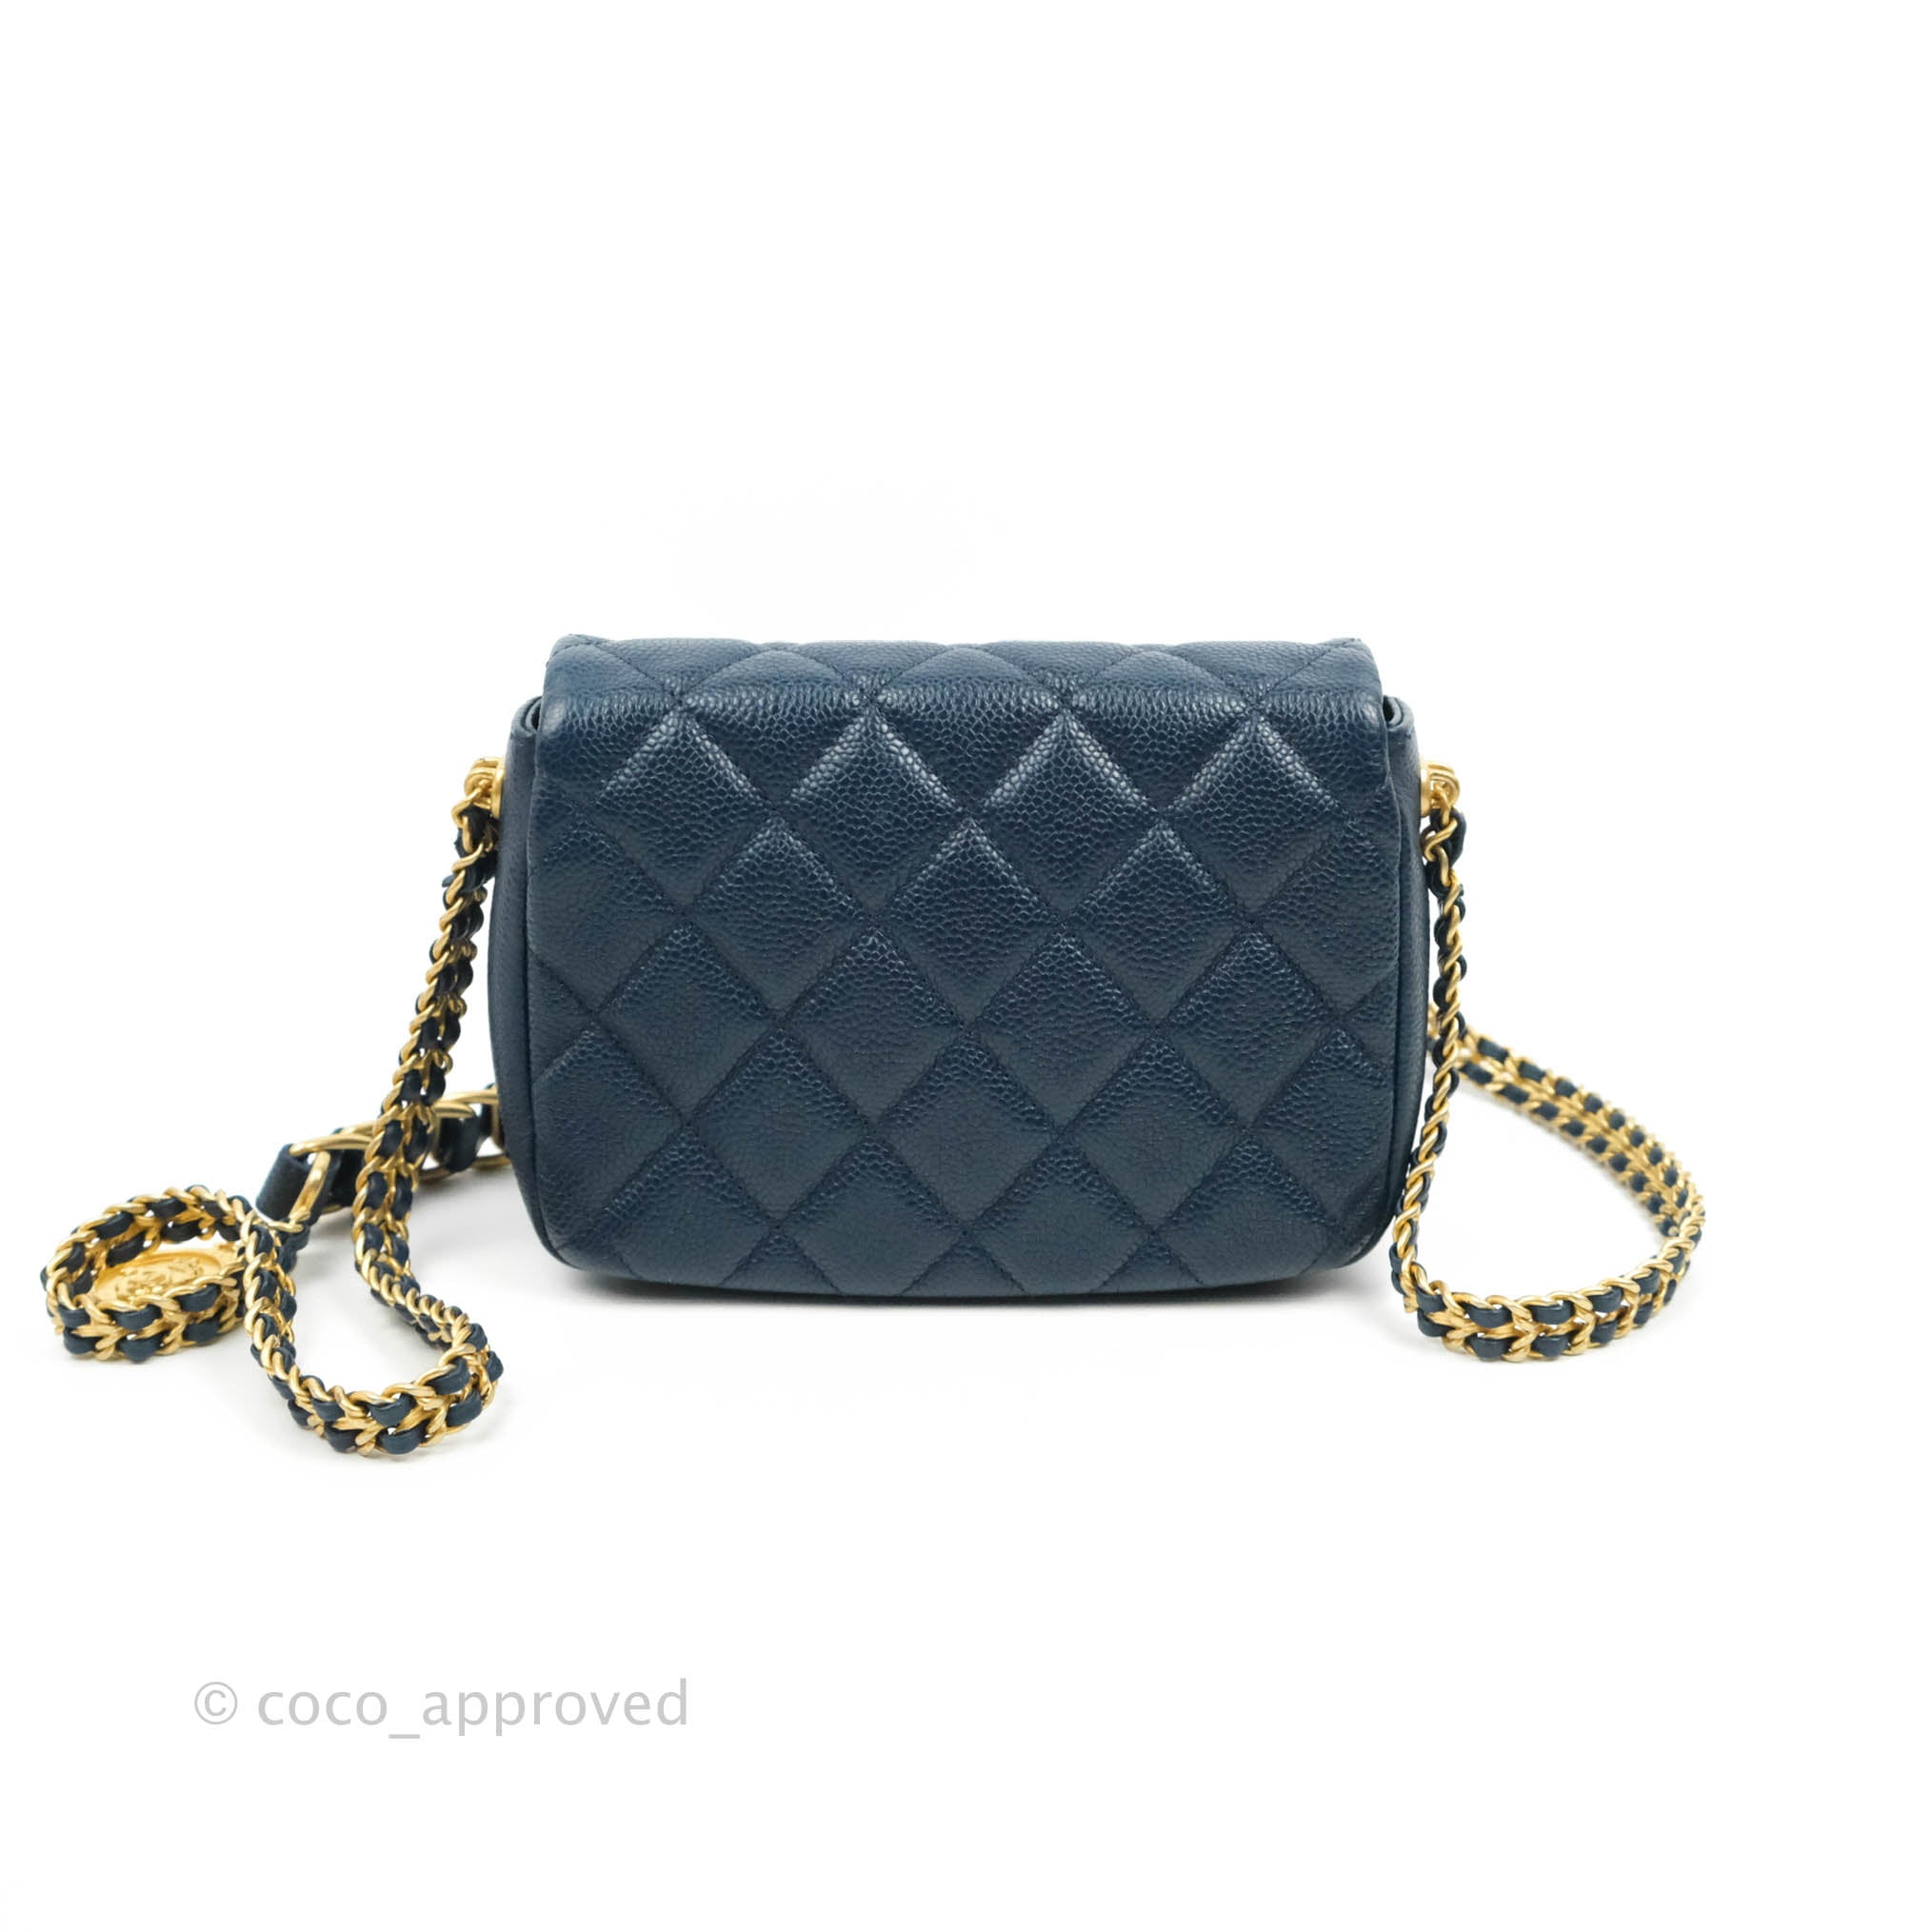 classic chanel quilted handbag